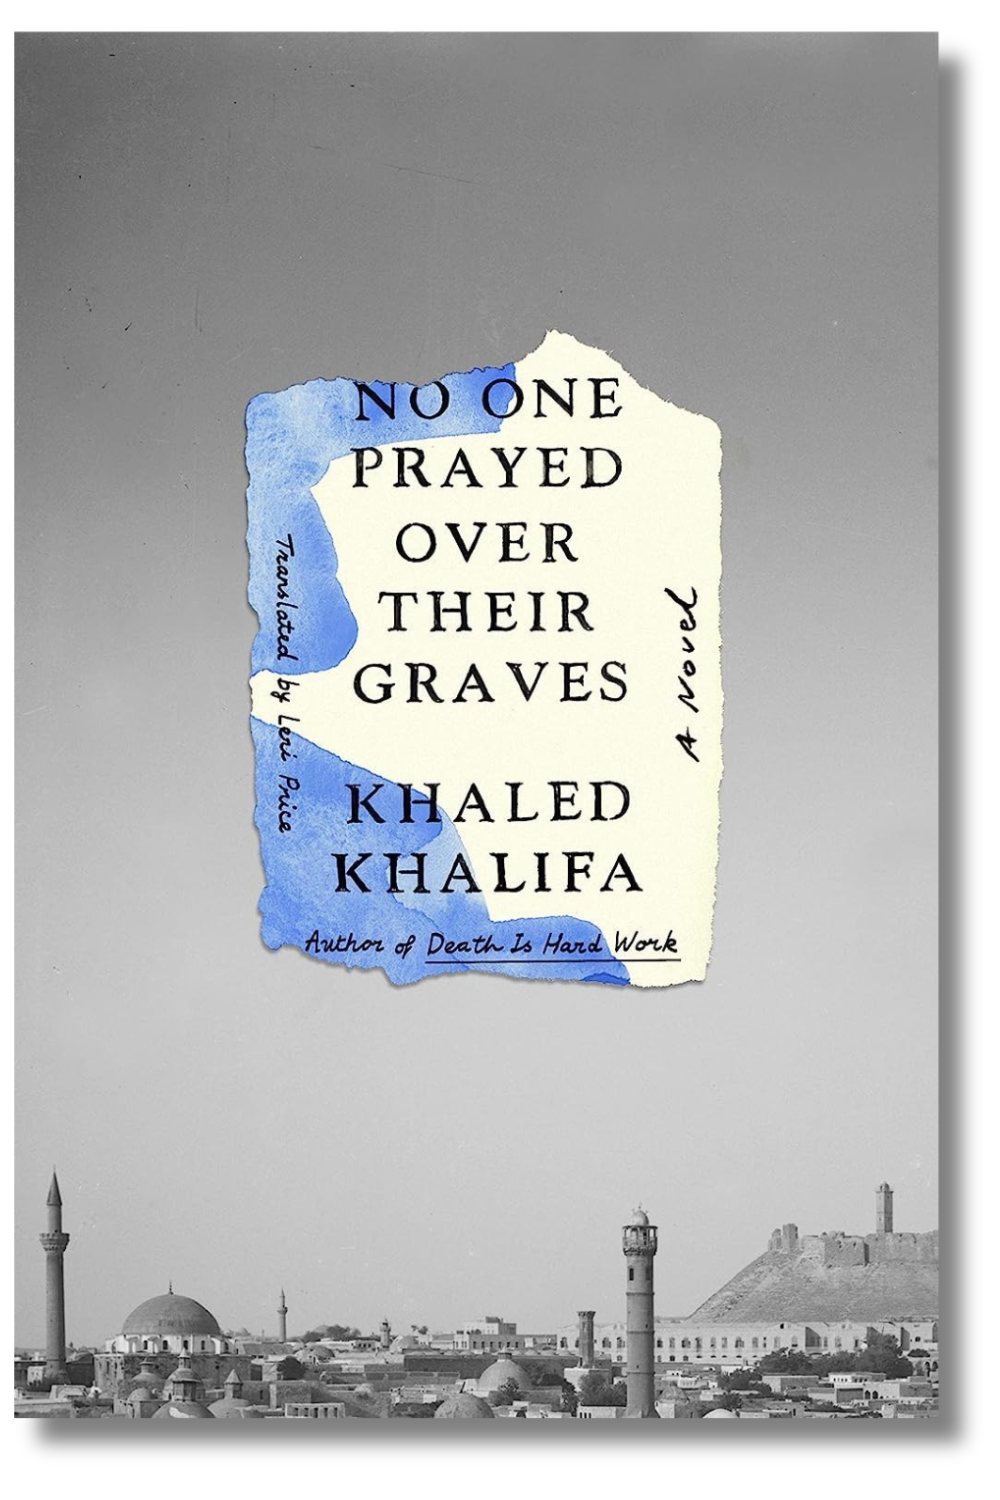 The cover of "No One Prayed Over Their Graves" by Khaled Khalifa, translated by Leri Price